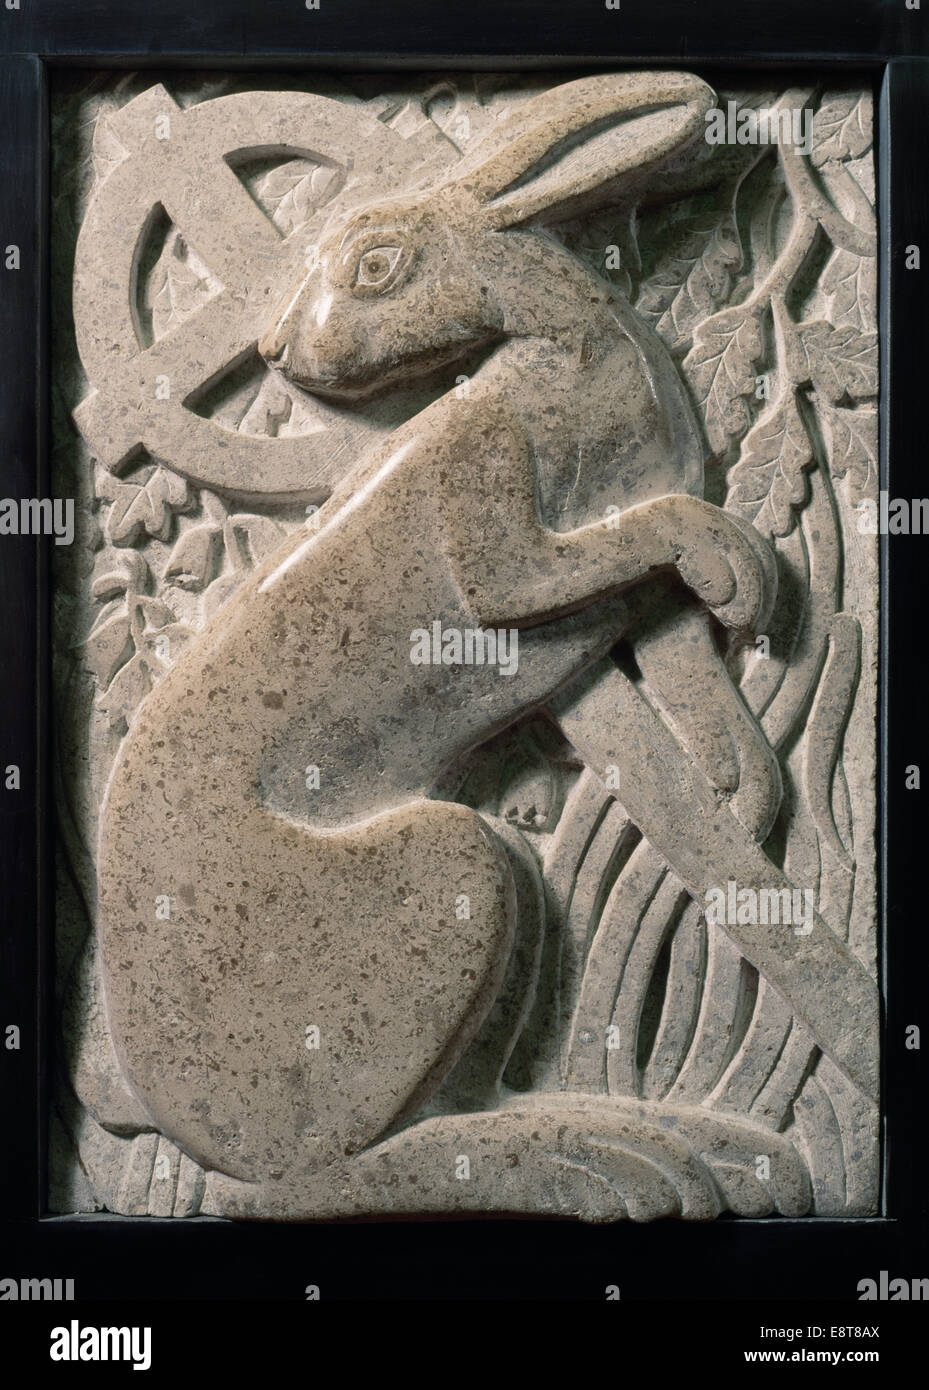 Modern stone carving of hare with Celtic cross & oak leaves at St Melangell's church, Powys, Mid Wales: legend of Melangell protecting a hunted hare. Stock Photo